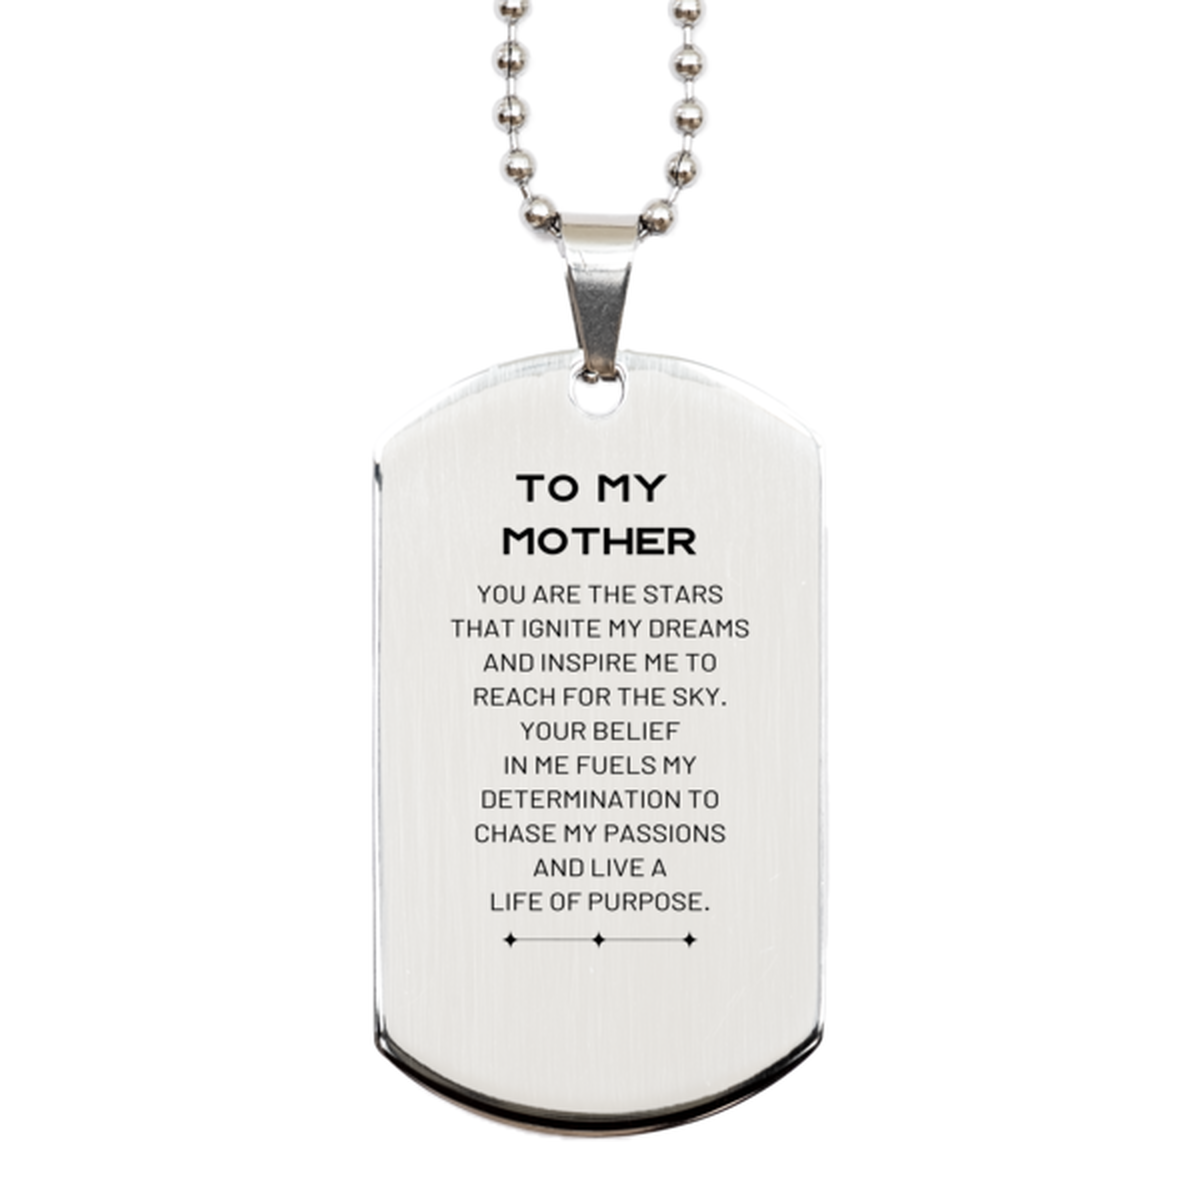 To My Mother Silver Dog Tag, You are the stars that ignite my dreams and inspire me to reach for the sky, Birthday Unique Gifts For Mother, Thank You Gifts For Mother